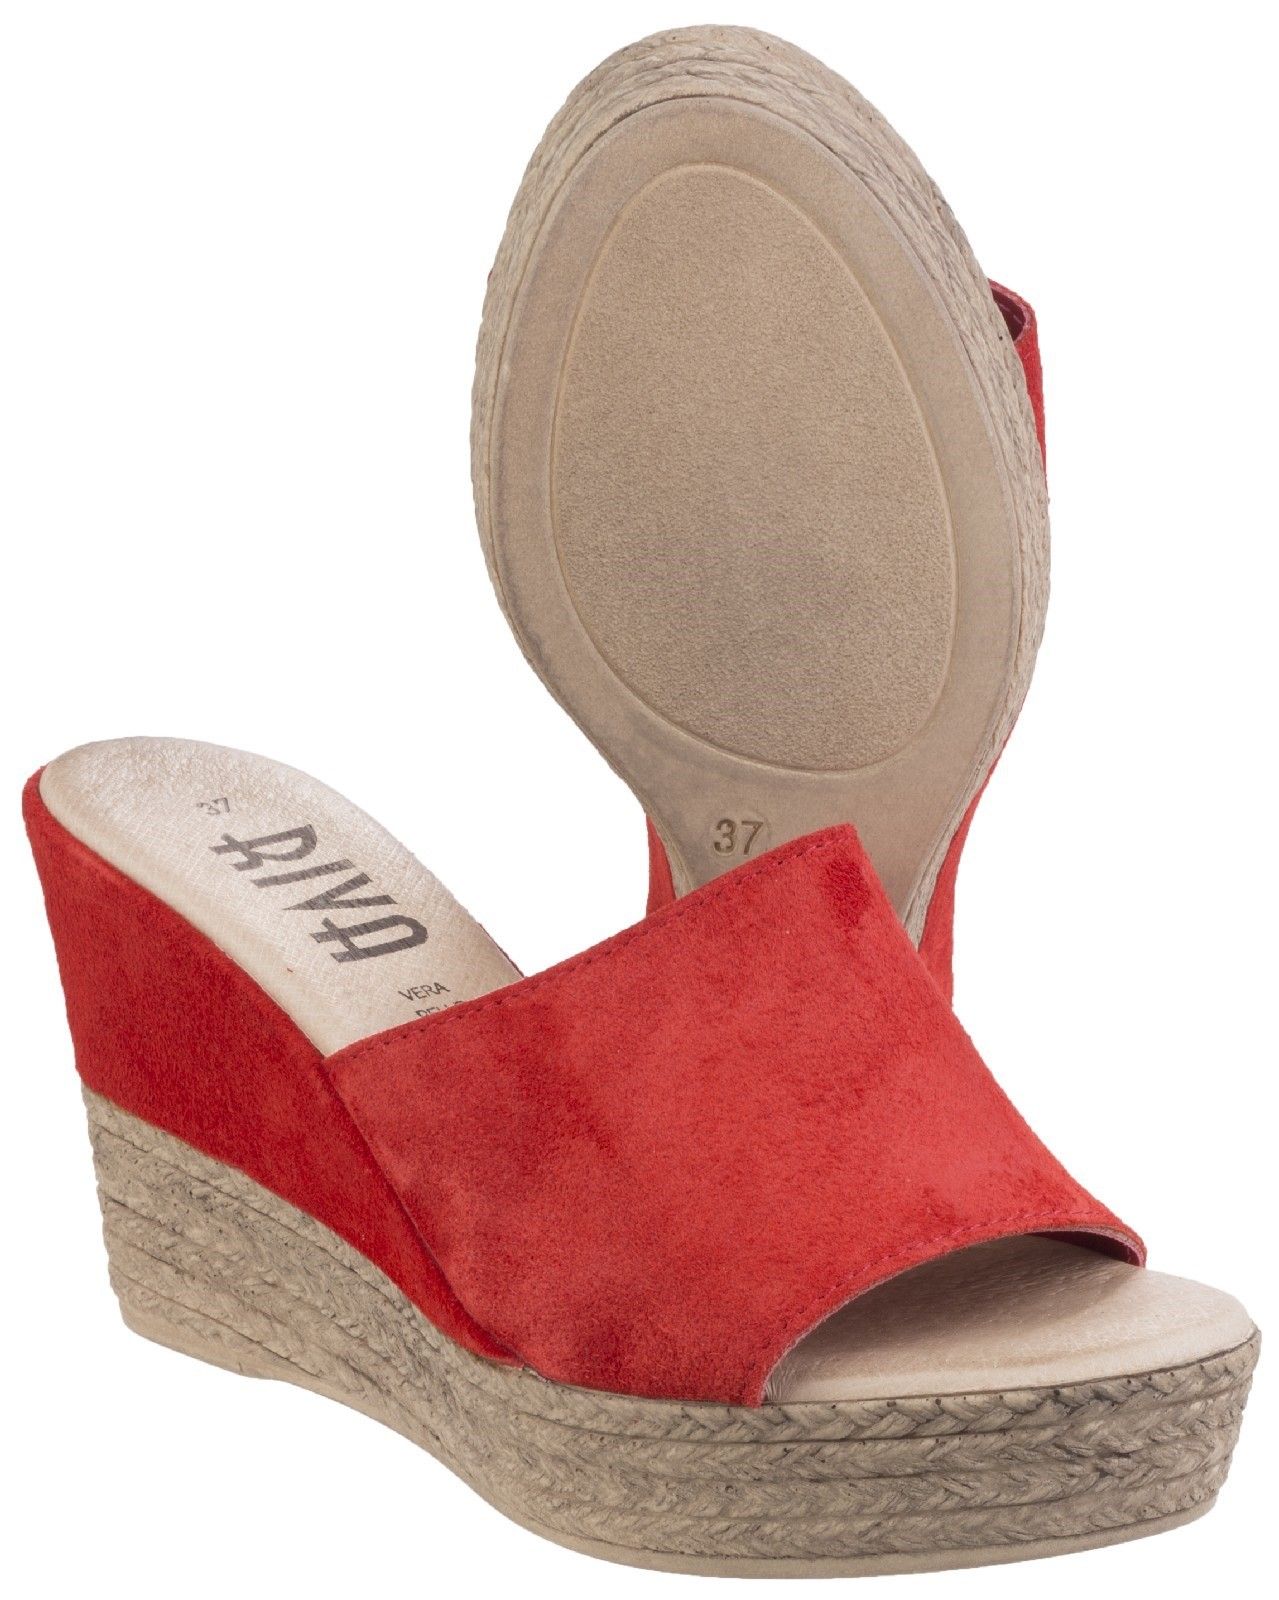 Suede leather Mule with half suede cover wedge and imitation espadrille stitchingSuede leather Mule. 
Half suede cover wedge and imitation espadrille stitching. 
Leather lining.